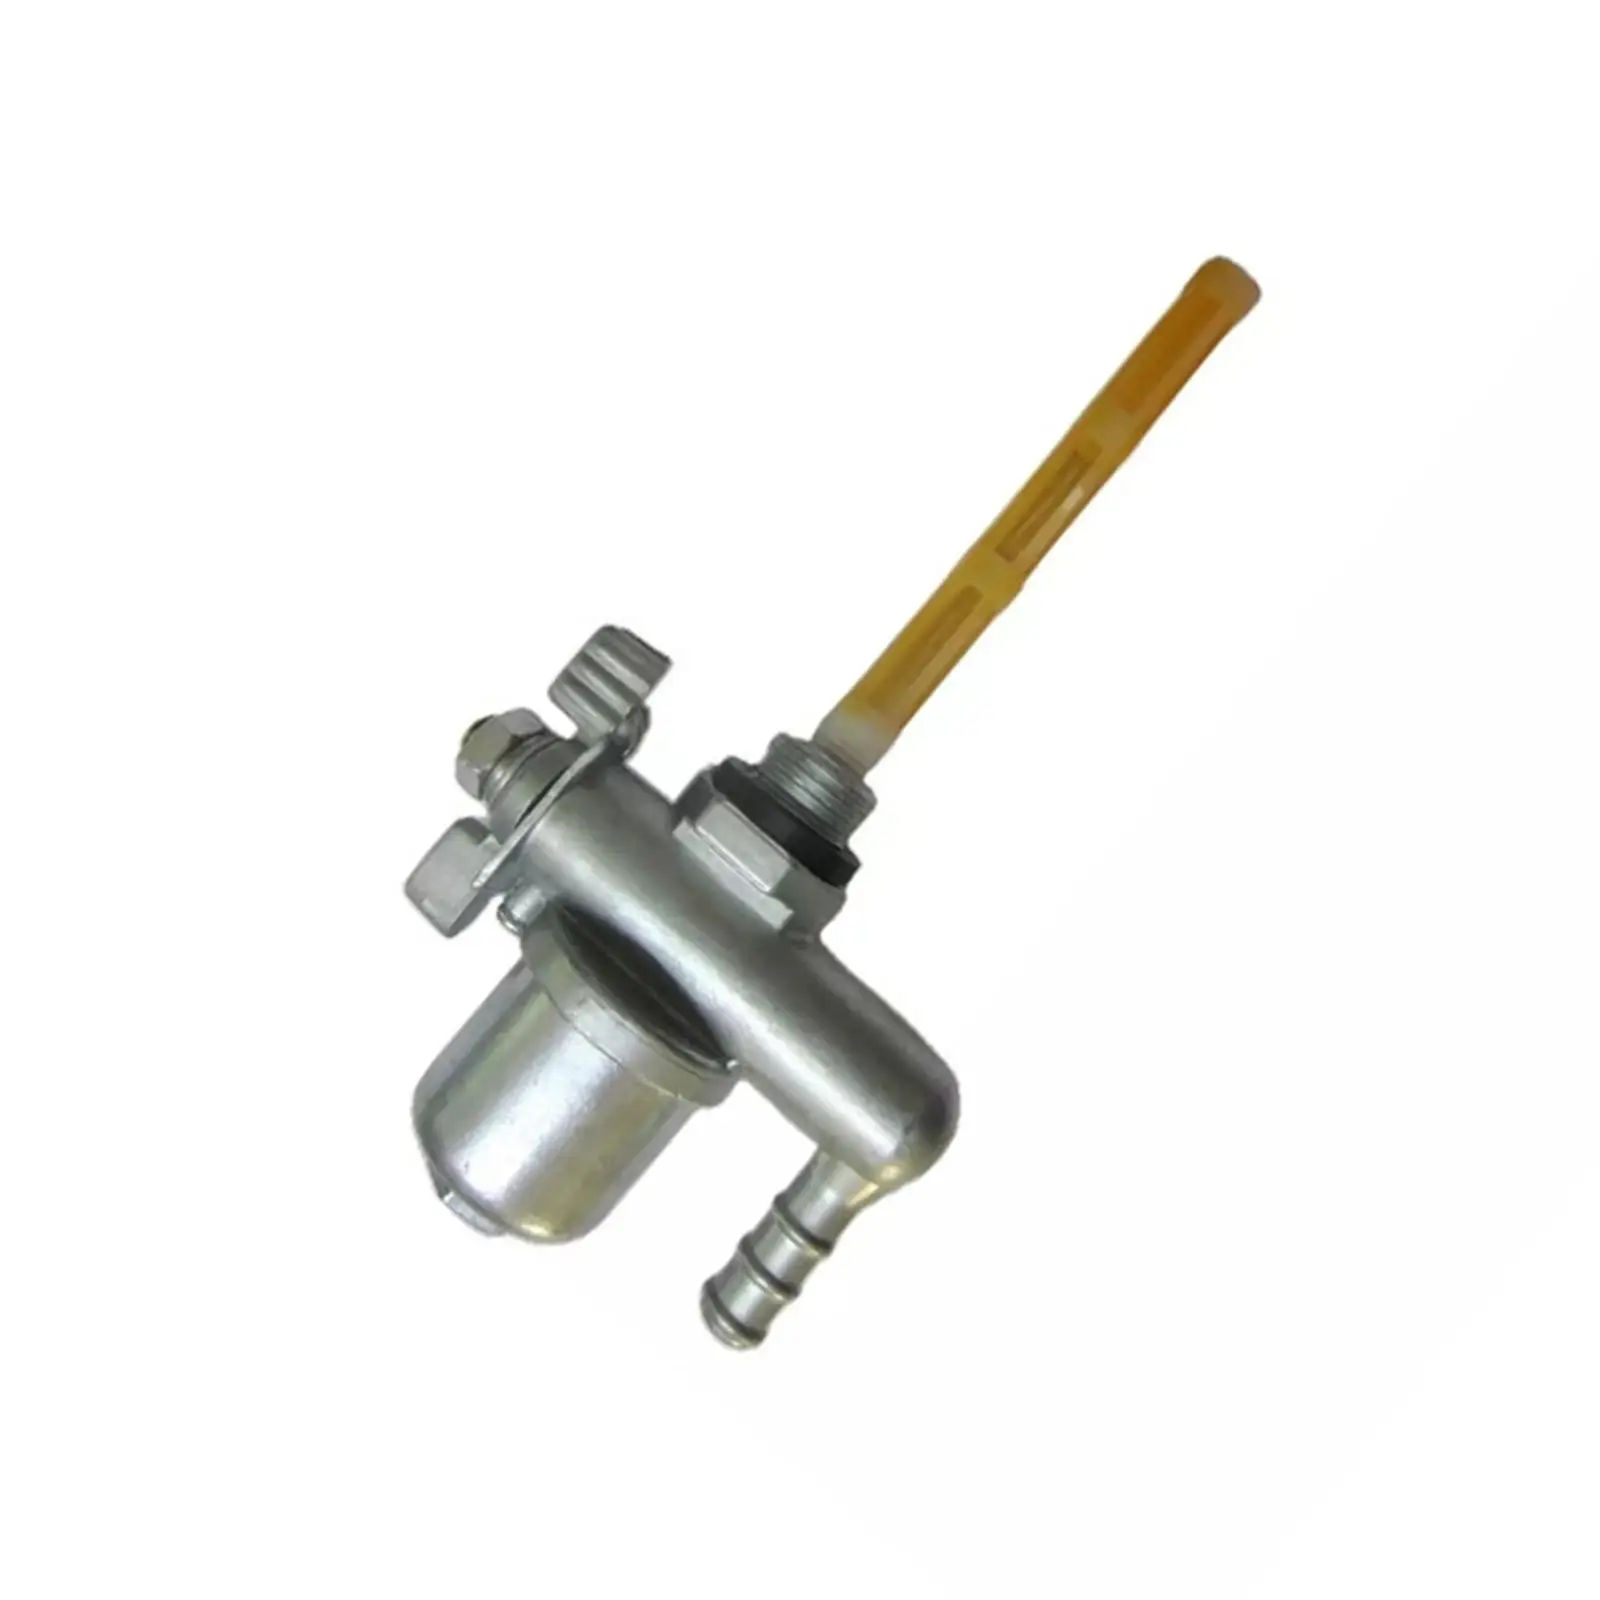 Motorcycle Fuel Gas Tank Switch Valve Petcock Repair Parts for Ruassia Msk Advanced manufacturing technology, high reliability.